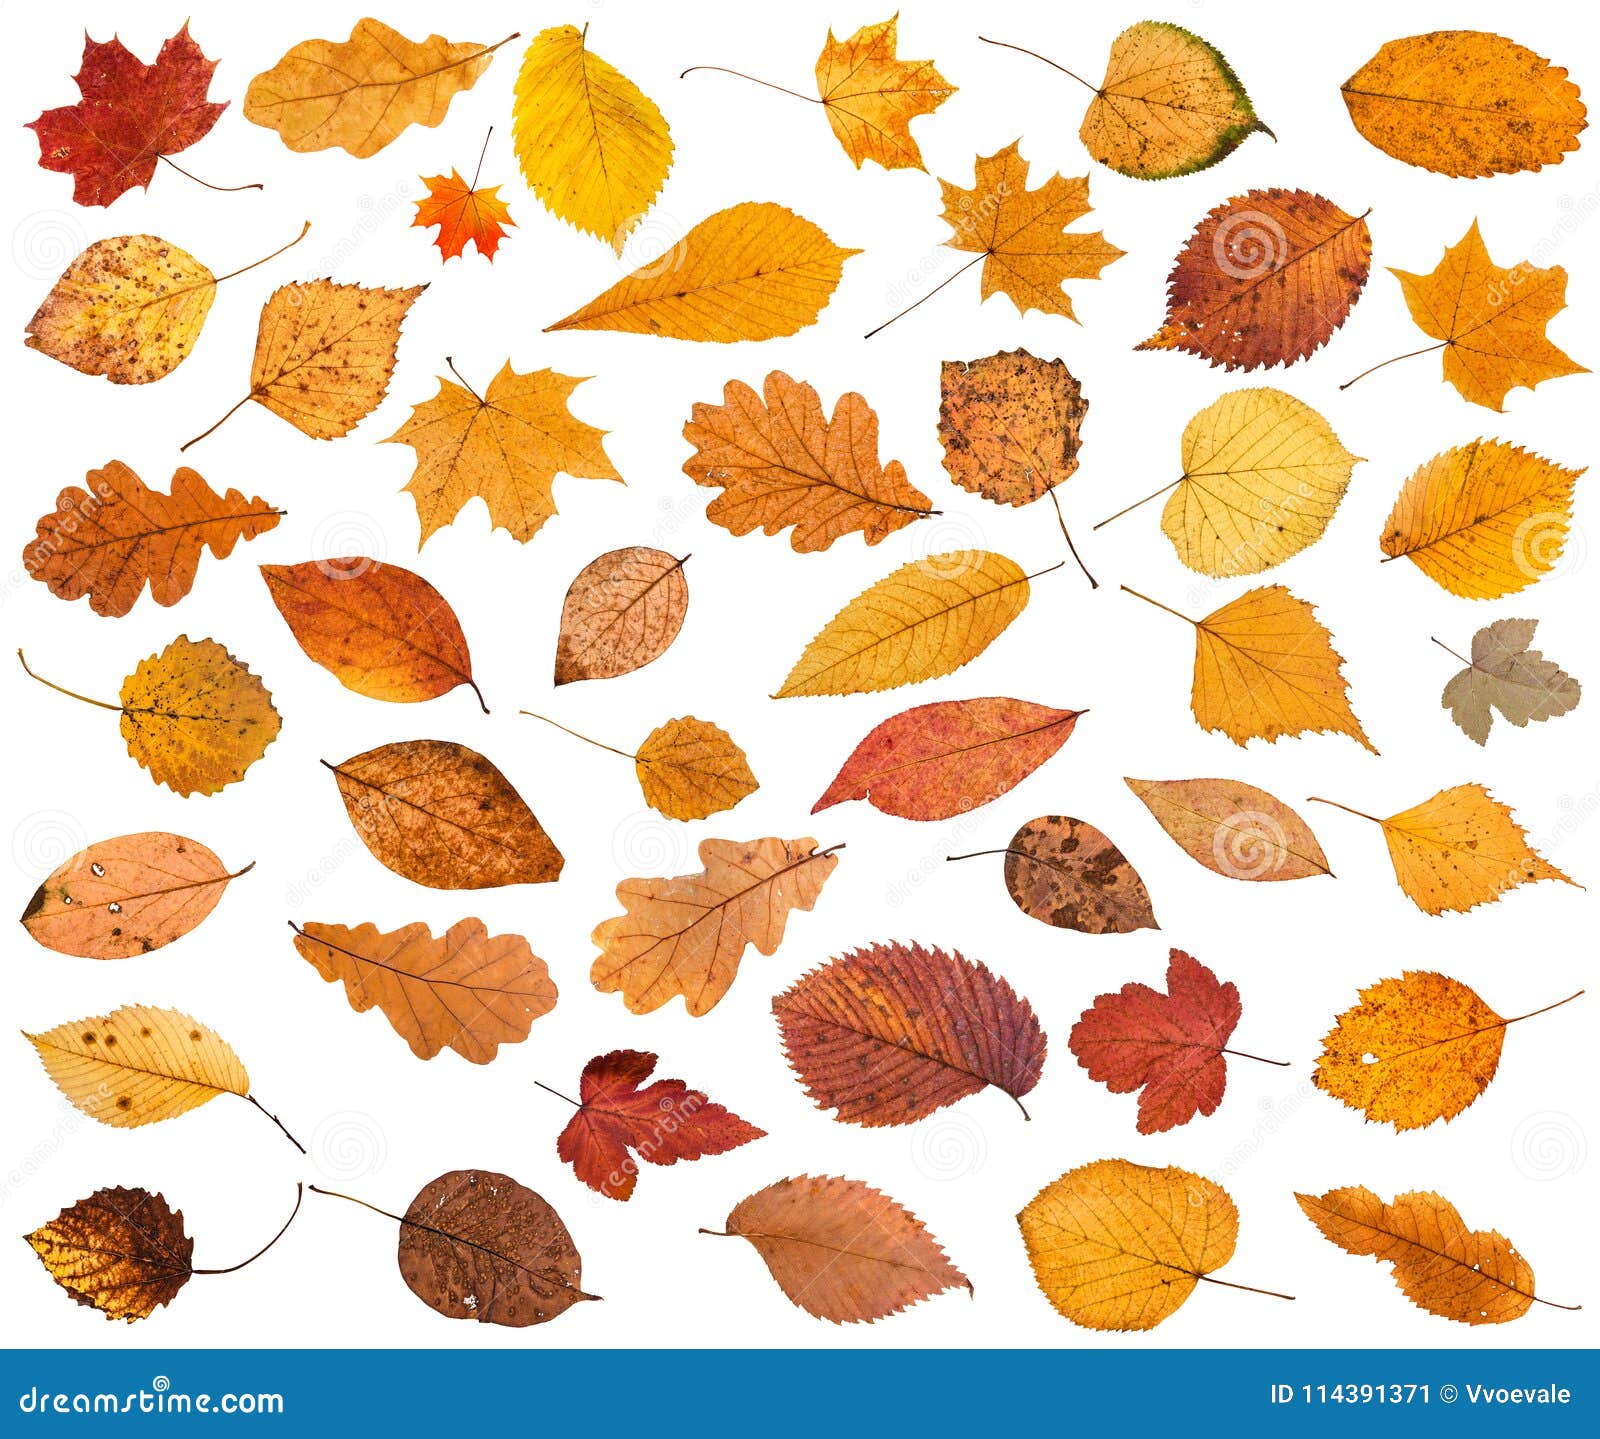 Many Various Dried Autumn Fallen Leaves Isolated Stock Image - Image of ...